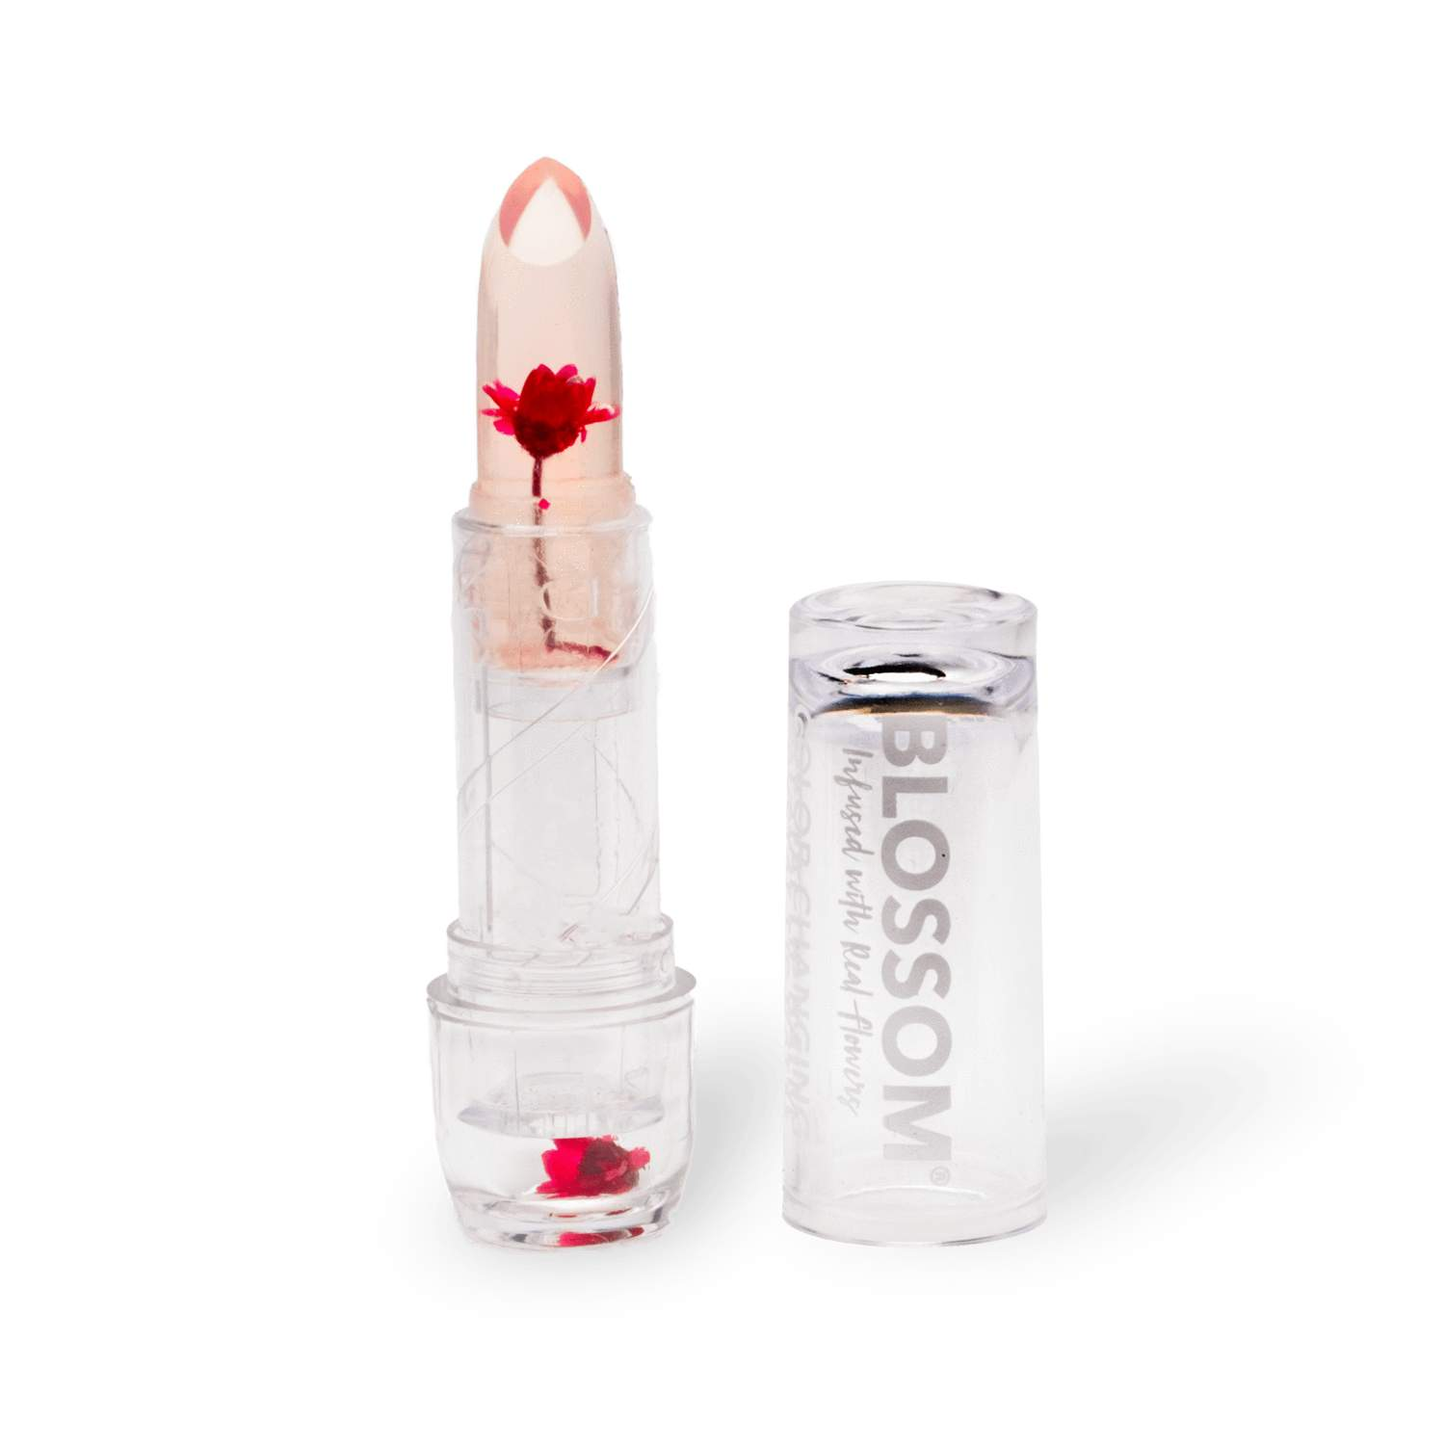 Blossom Color Changing Crystal Lip Balm 3g-Blossom-Blossom_ Color Changing Lip Balm's,Brand_Blossom,Collection_Makeup,Makeup_Lip,Makeup_Lipstick